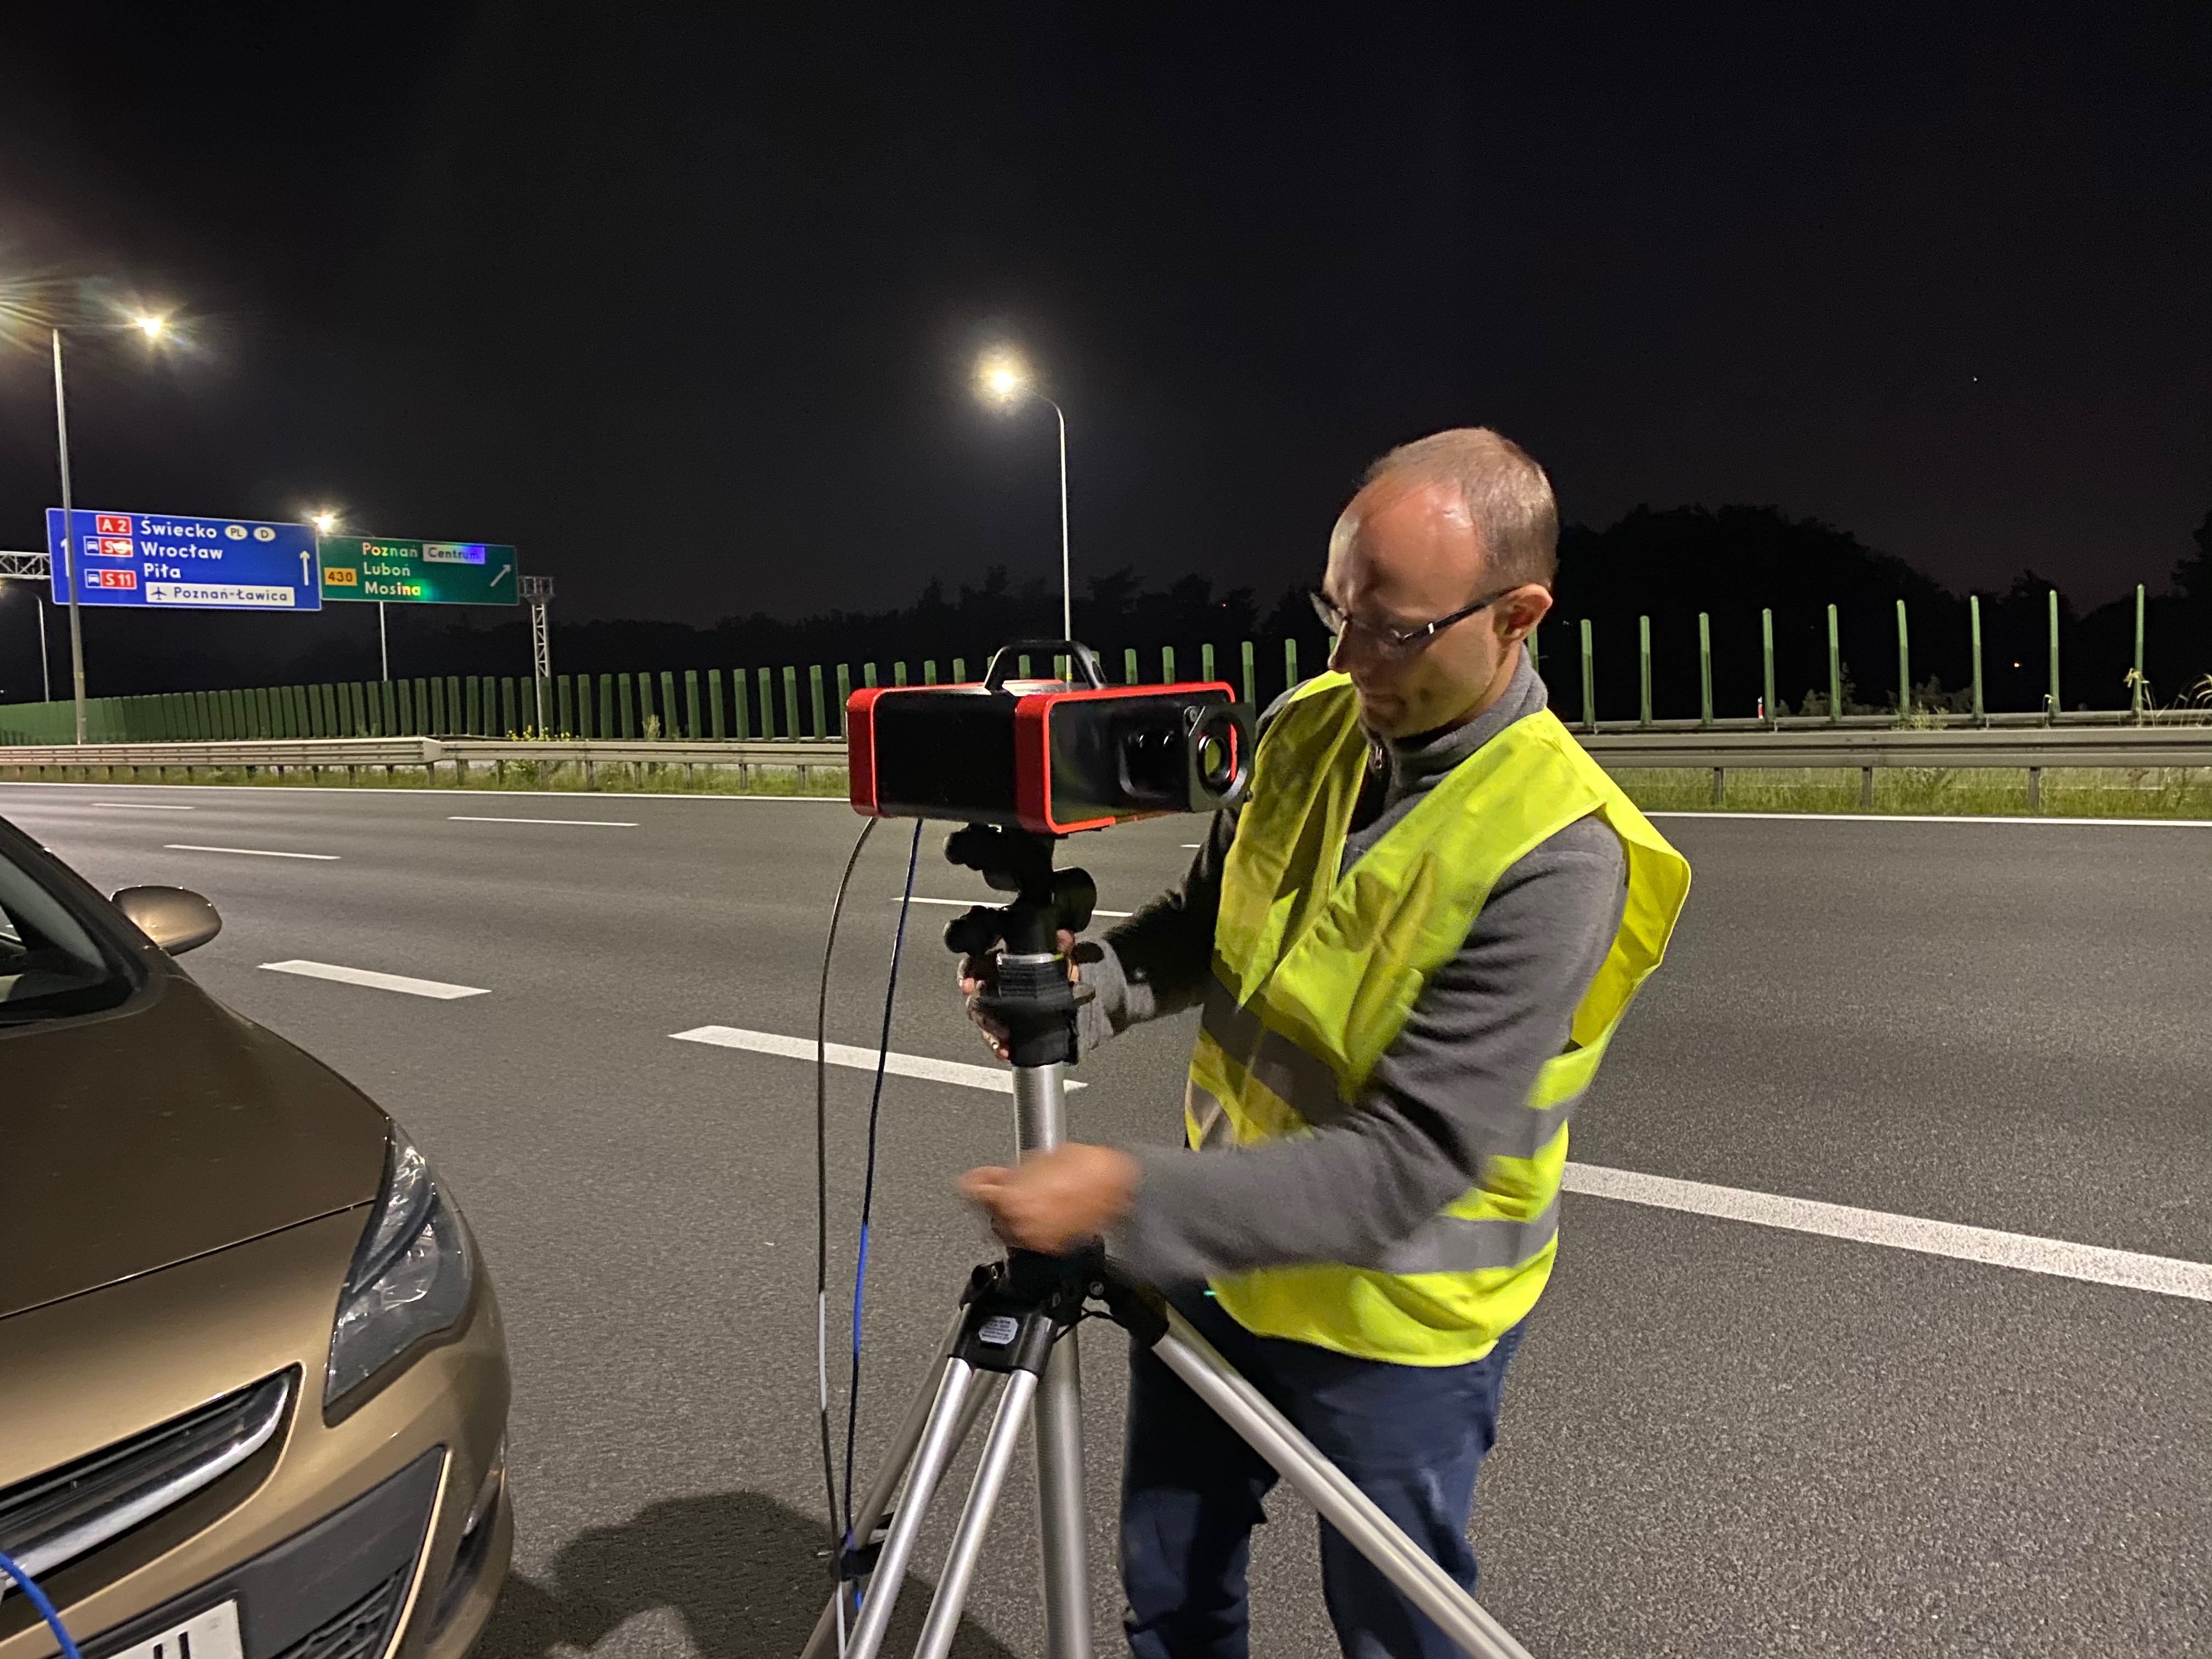 GL Opticam luminance measurement road lighting First fully adapted system for road lighting measurements